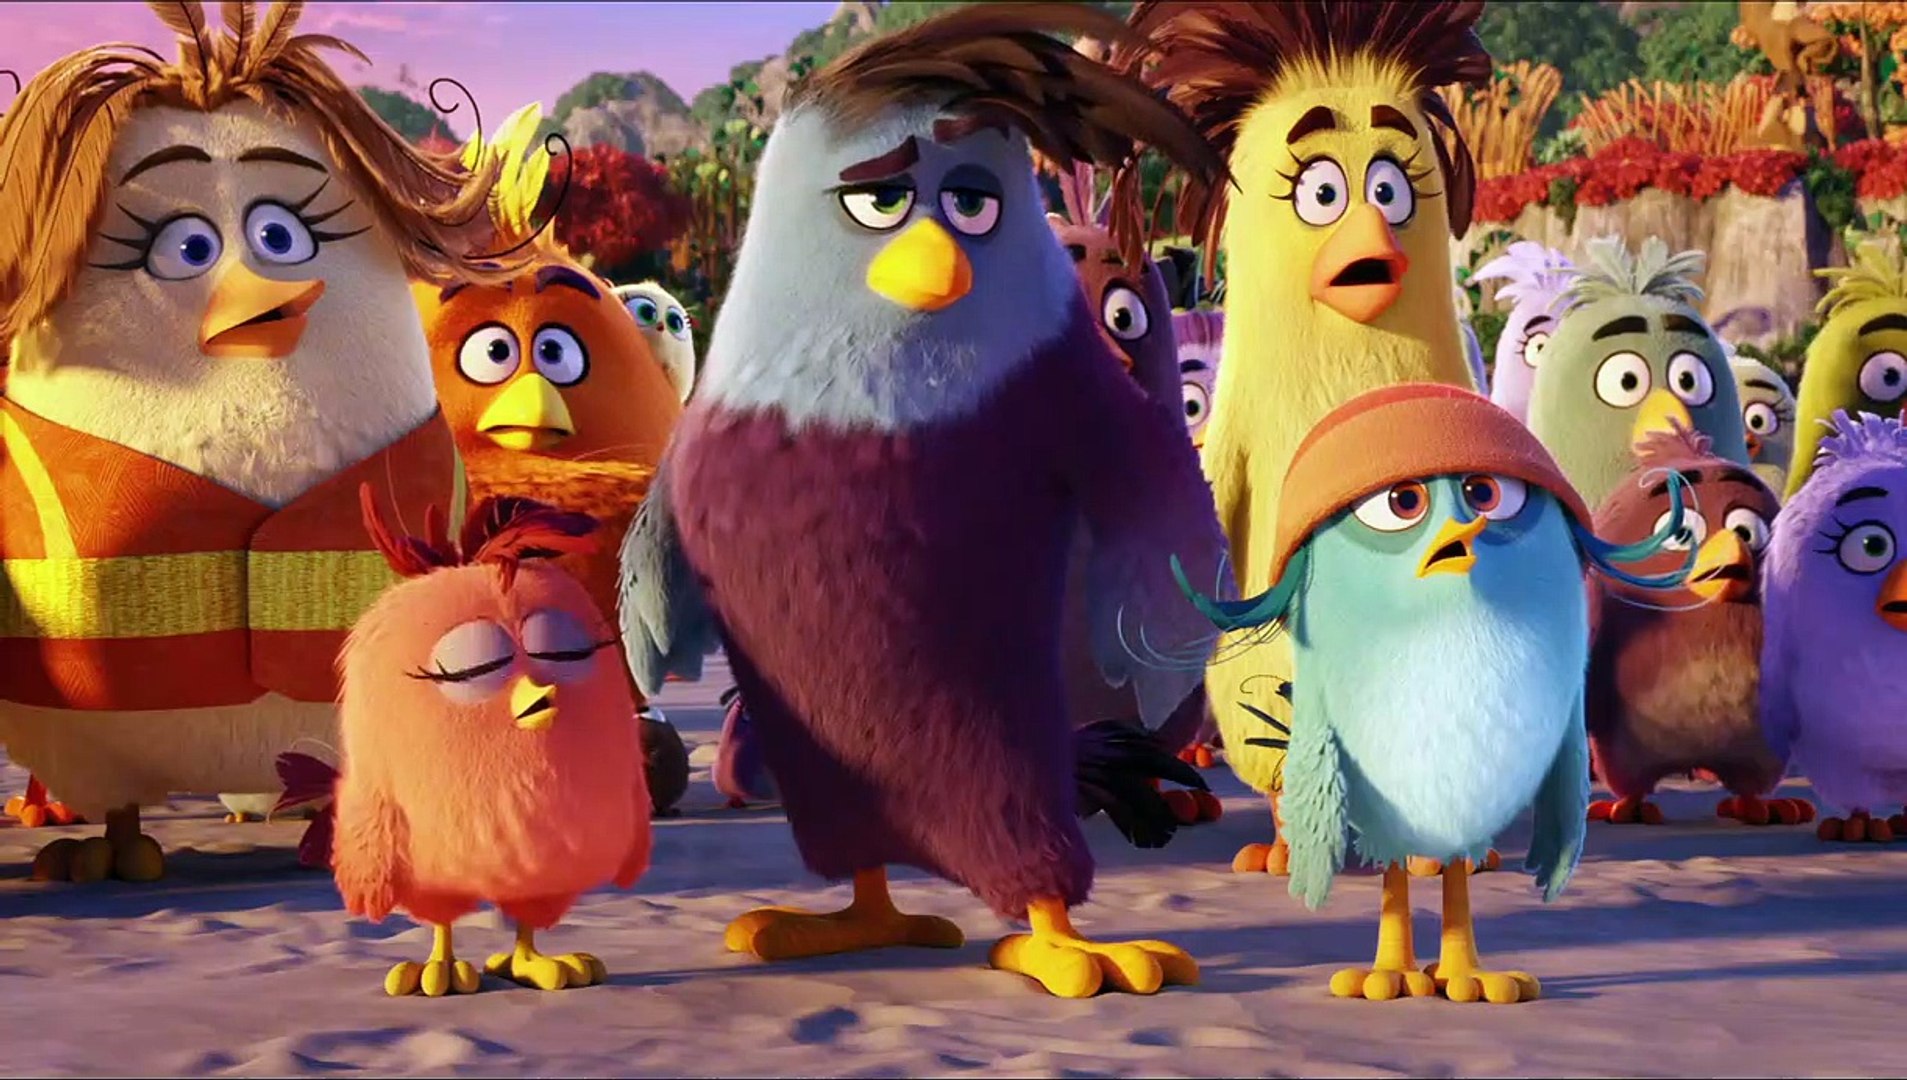 The Angry Birds Movie Tv Spot - Meet the Pigs - Dailymotion Video